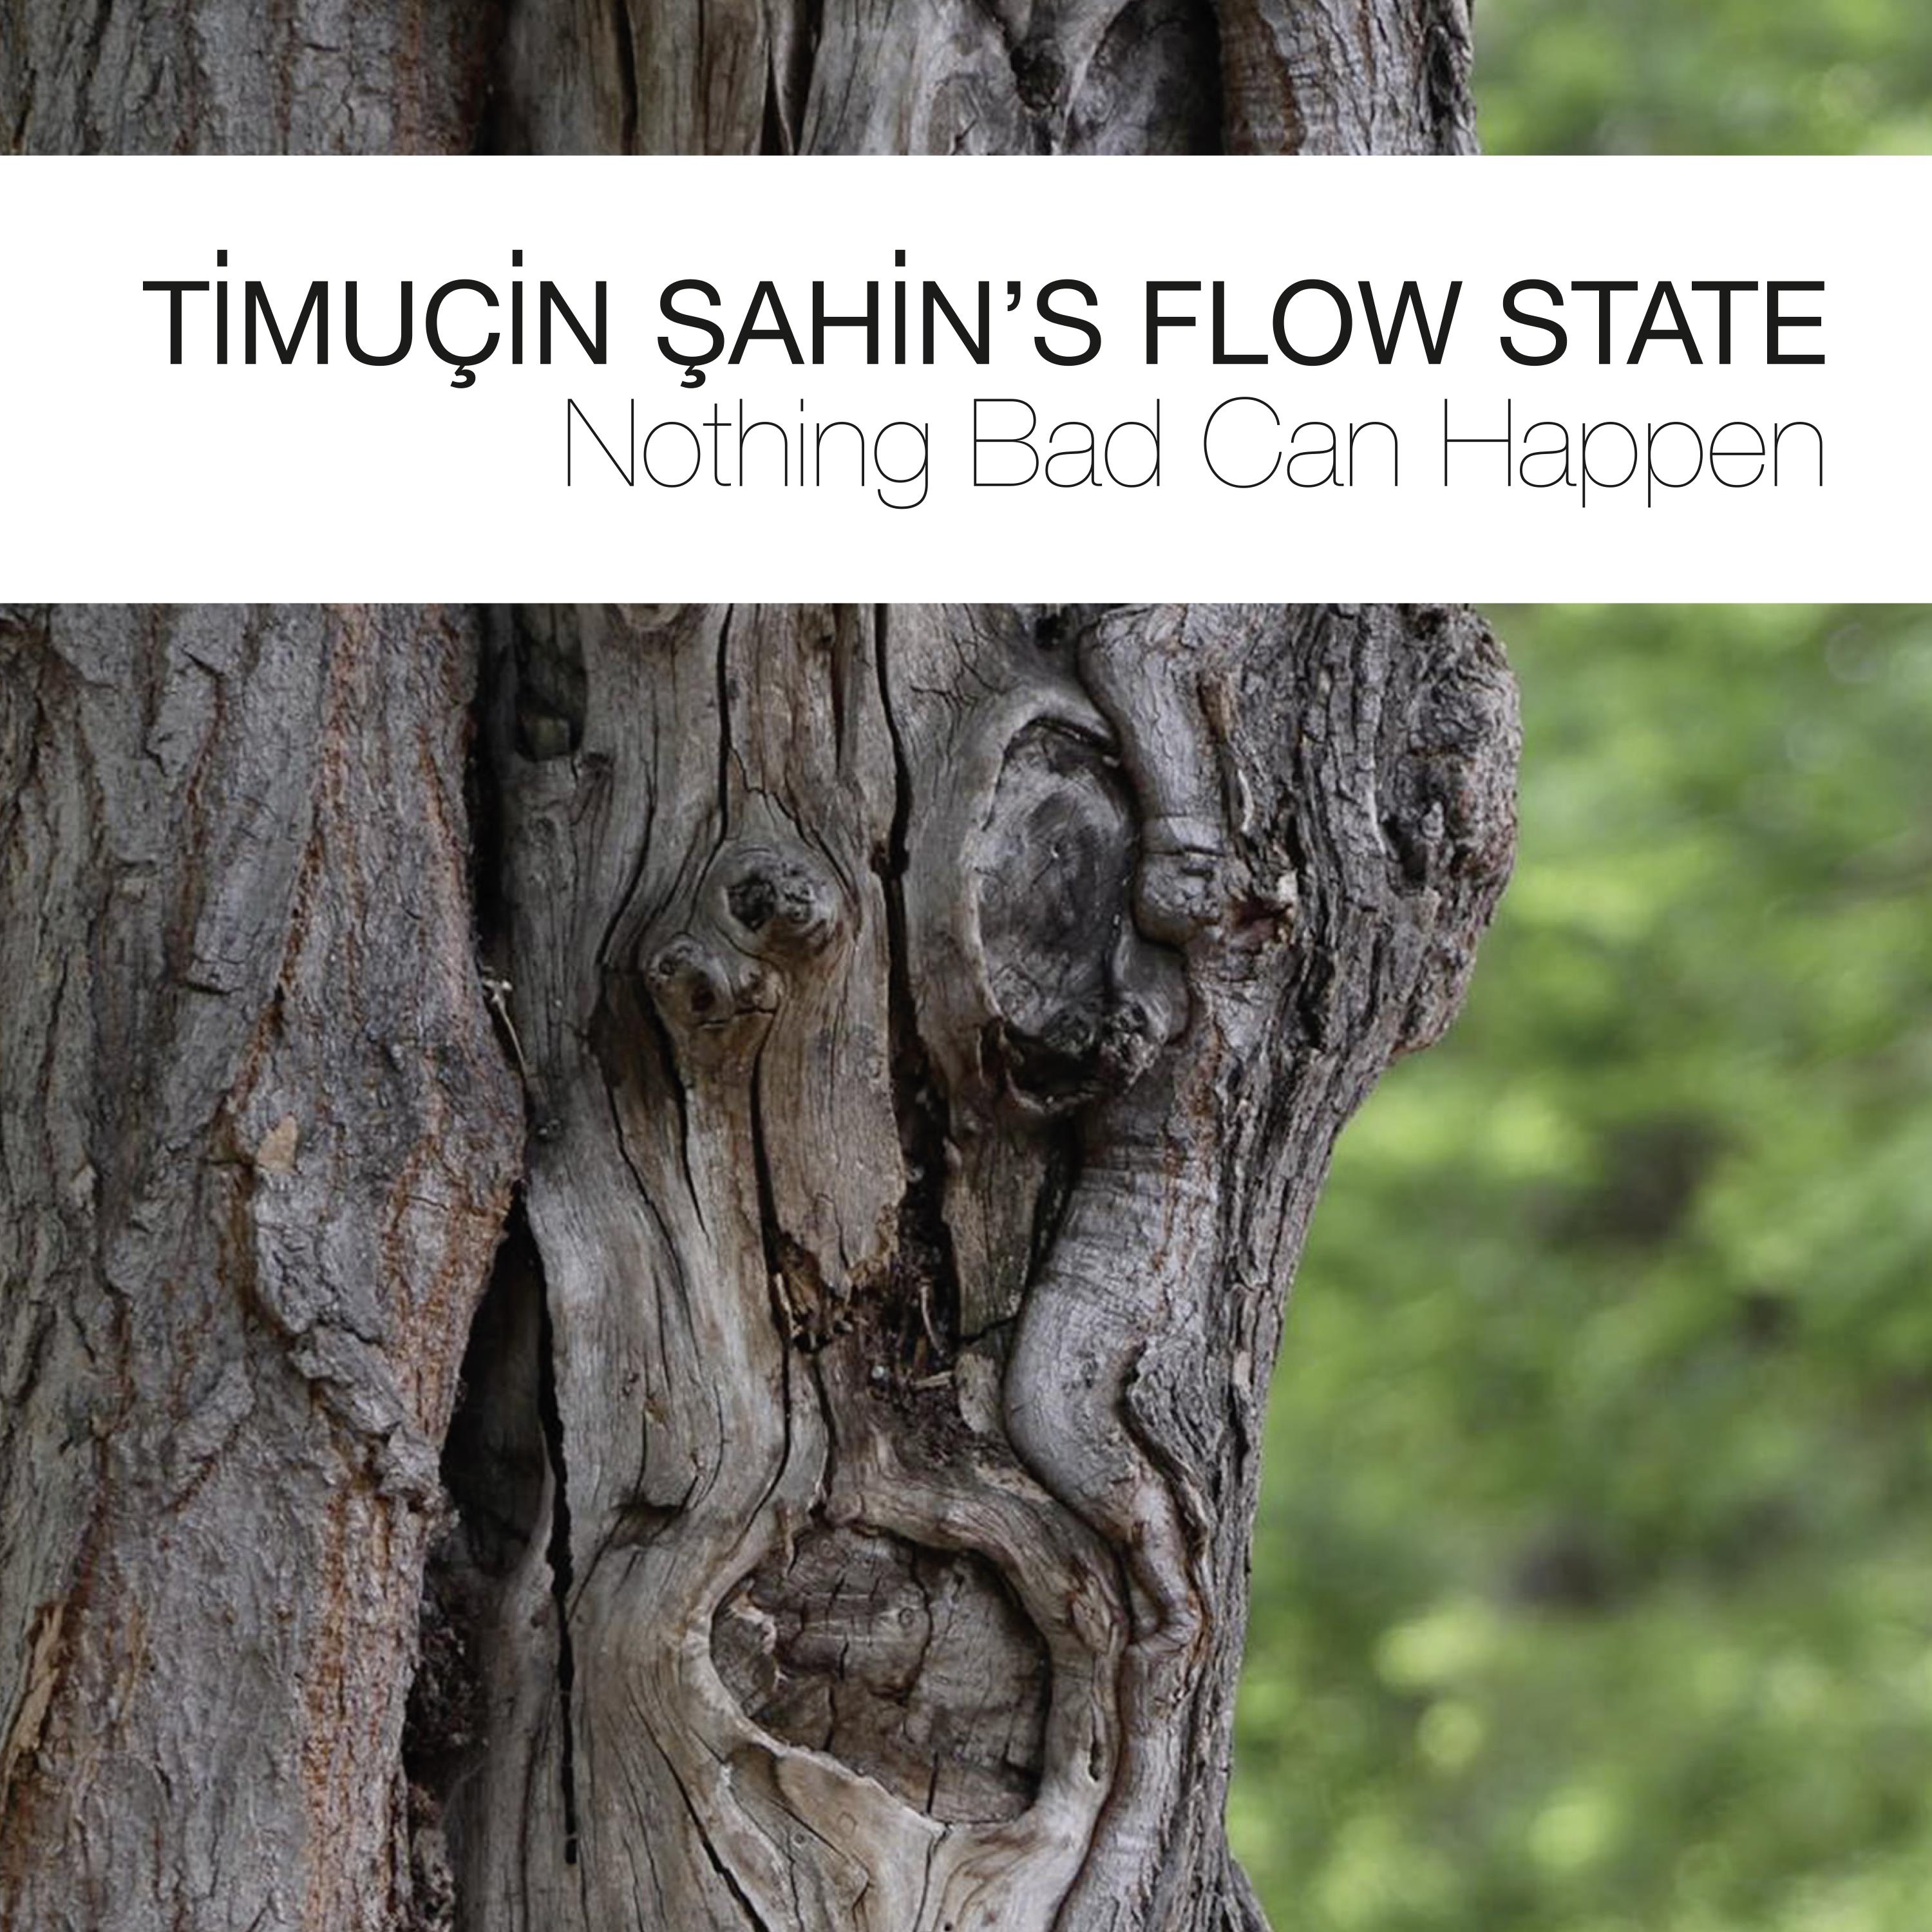 Timucin Sahin’s Flow State - Nothing Bad Can Happen (2017) [HDTracks FLAC 24bit/44,1kHz]